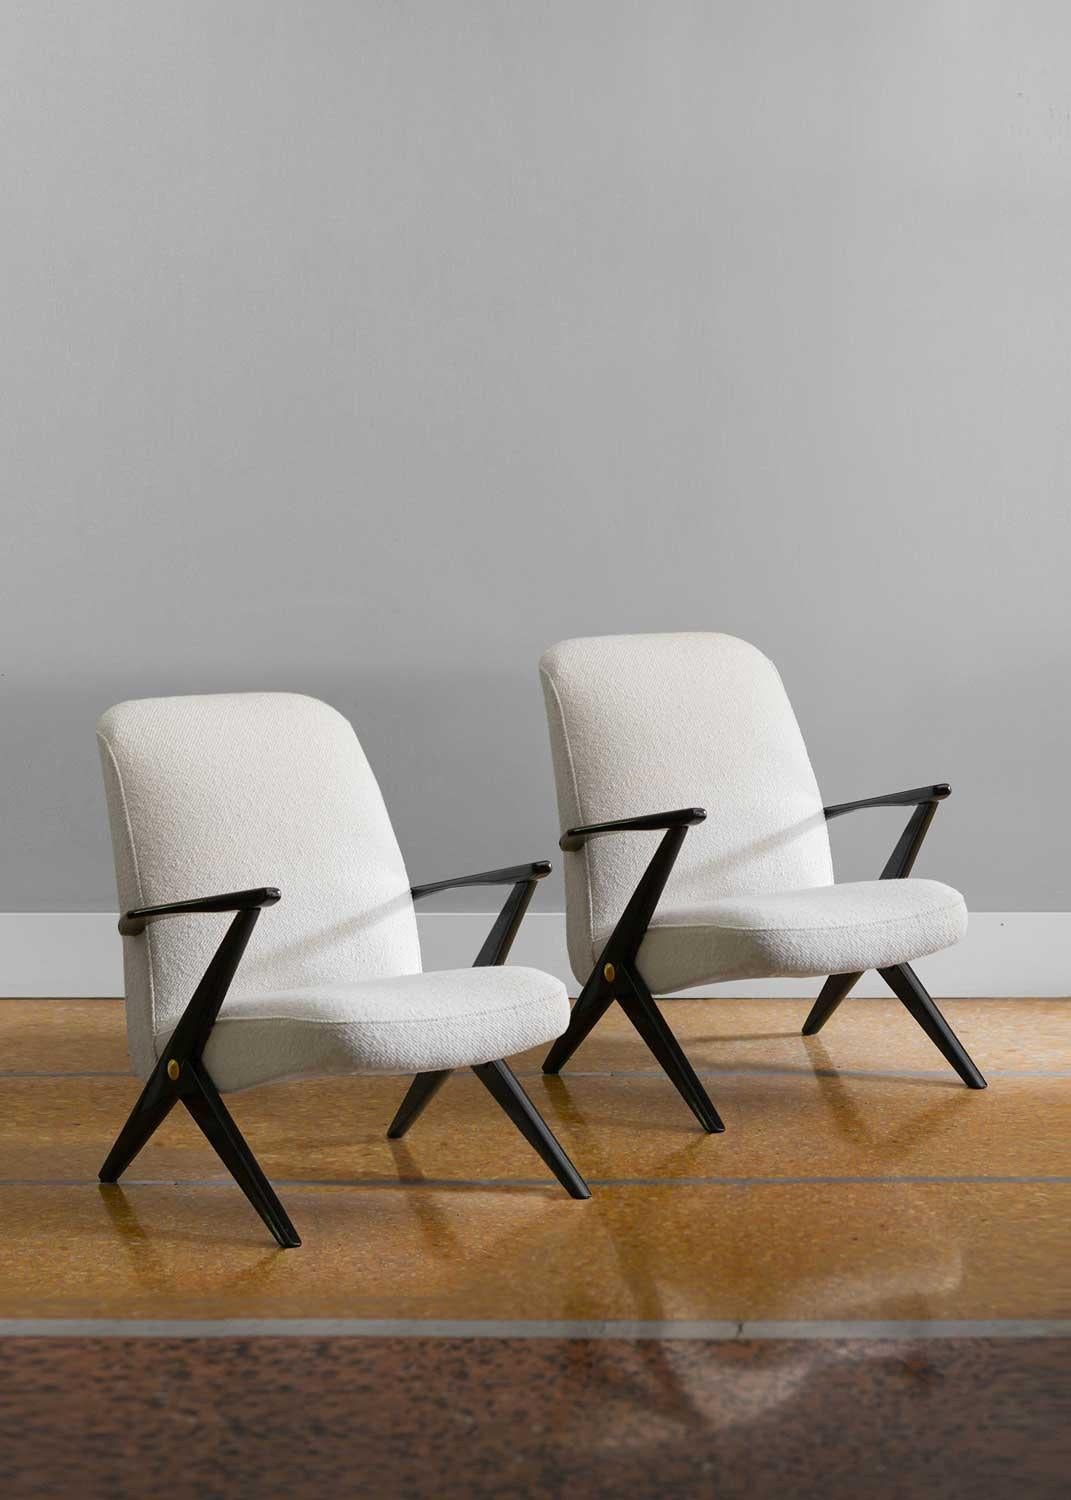 Fabric Triva armchairs by Bengt Ruda for Nordisk Kompaniets, 1955 (set of 2)